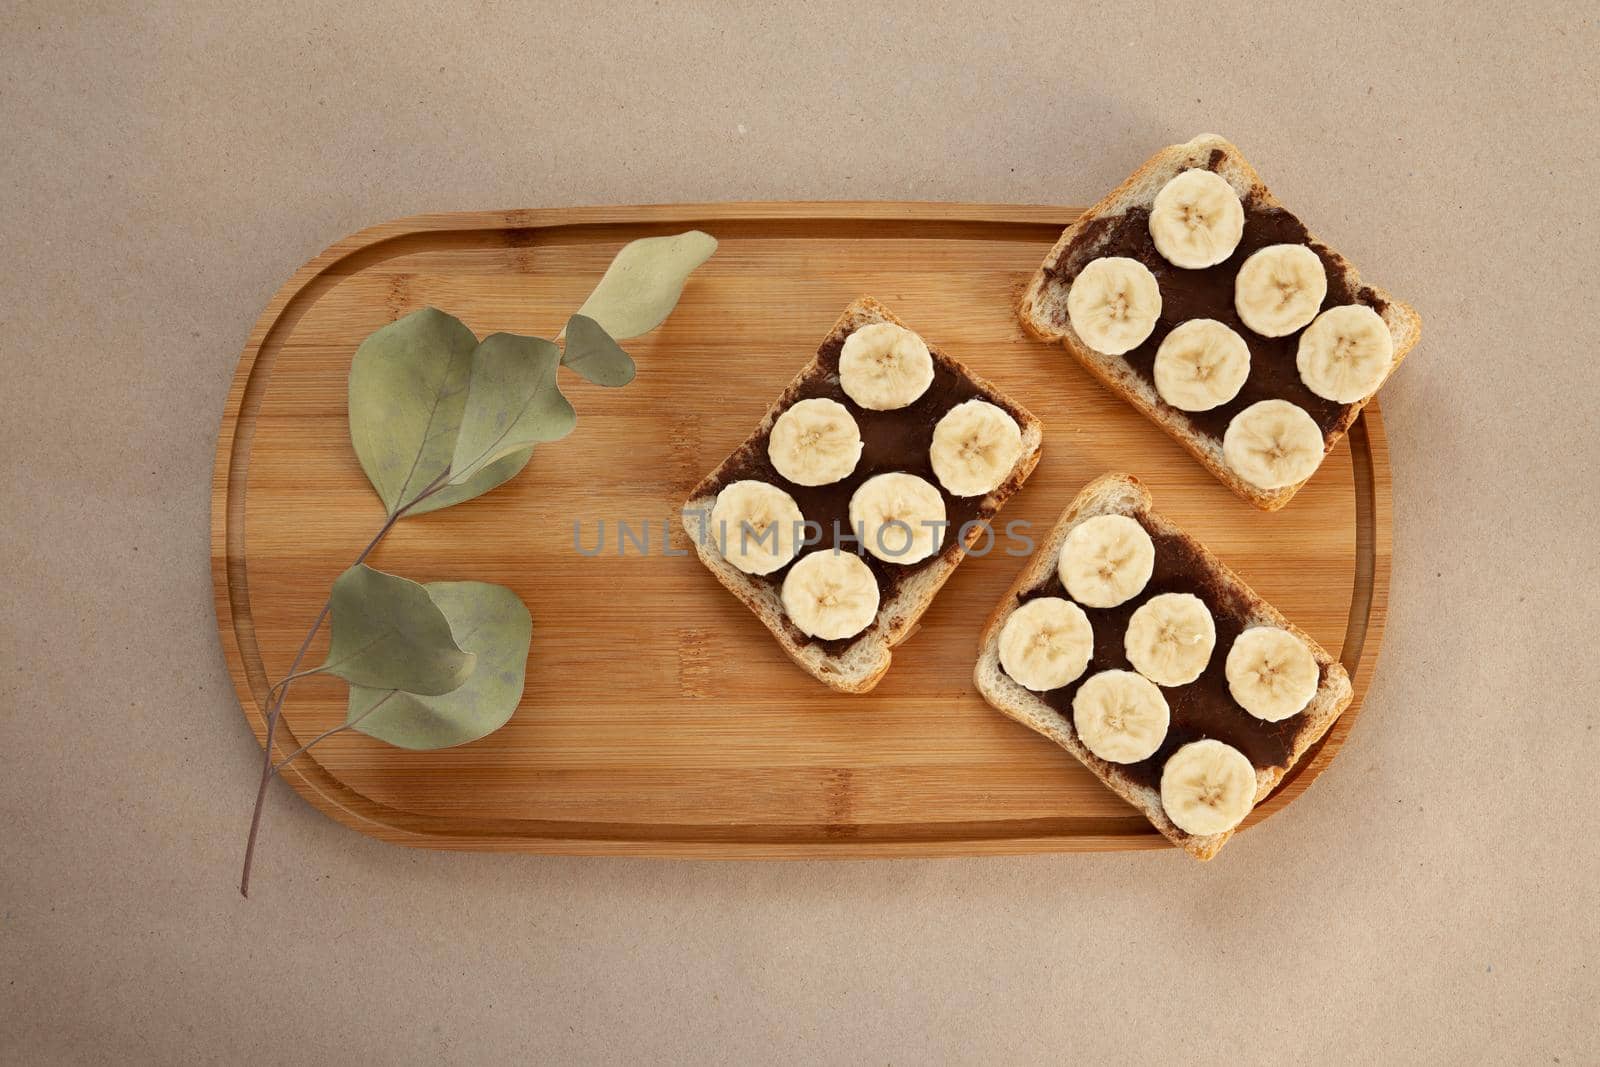 Three banana white bread toasts smeared with chocolate butter that lie on a cutting board with a sprig of leaves on craft paper background. top view with area for text